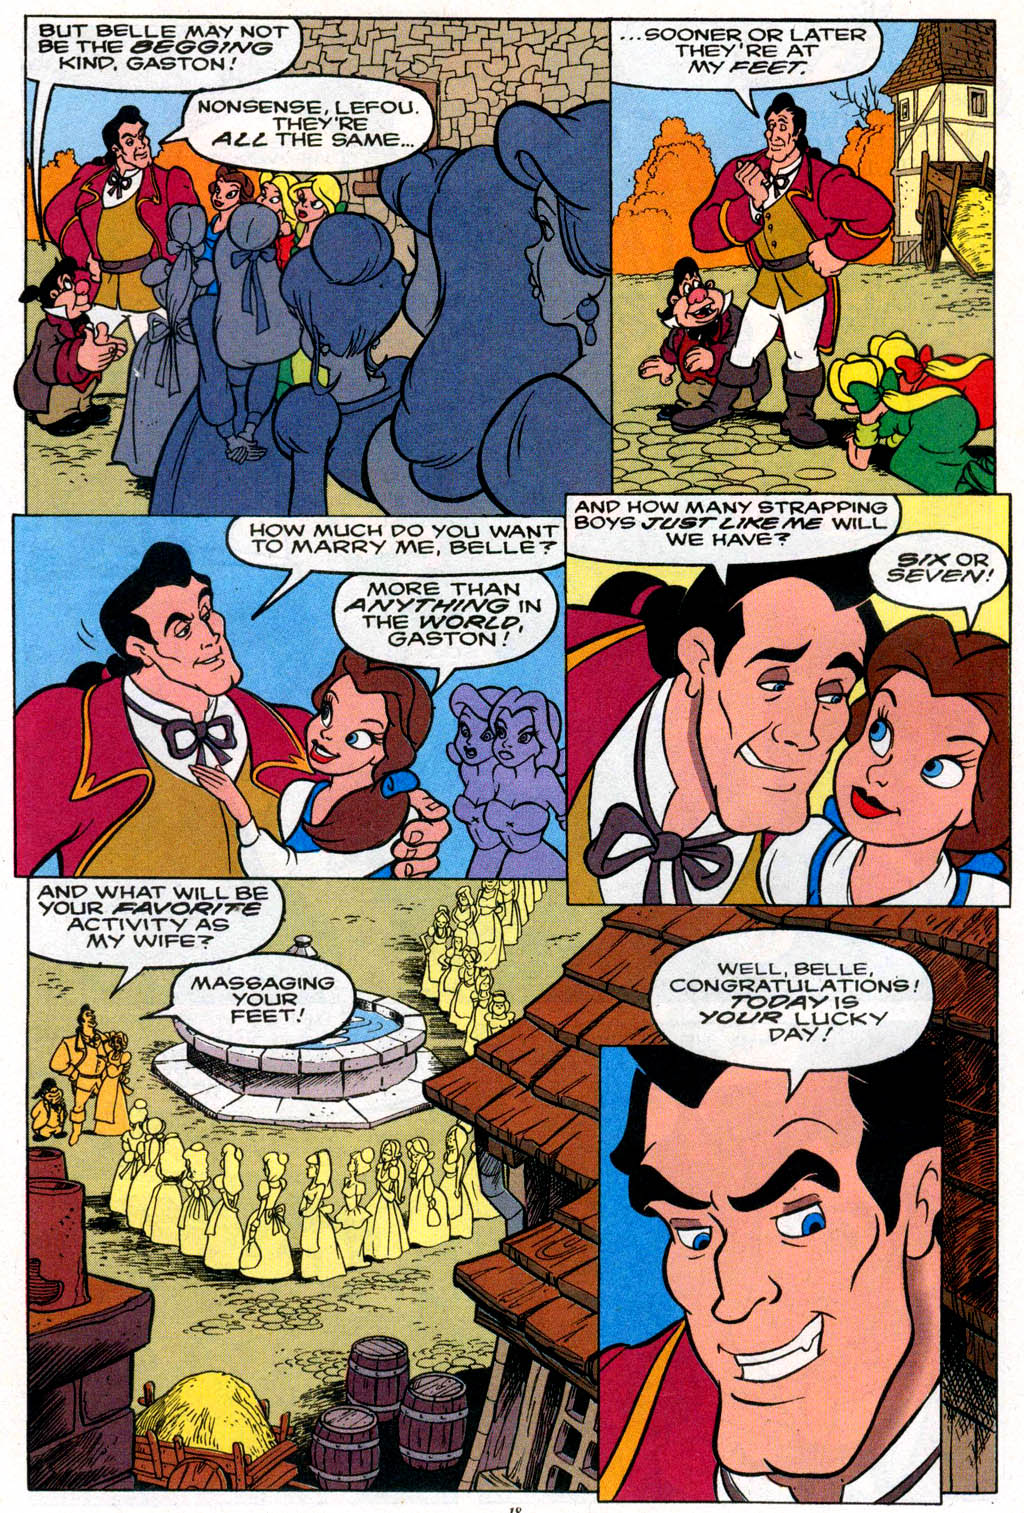 Read online Disney's Beauty and the Beast comic -  Issue #3 - 15